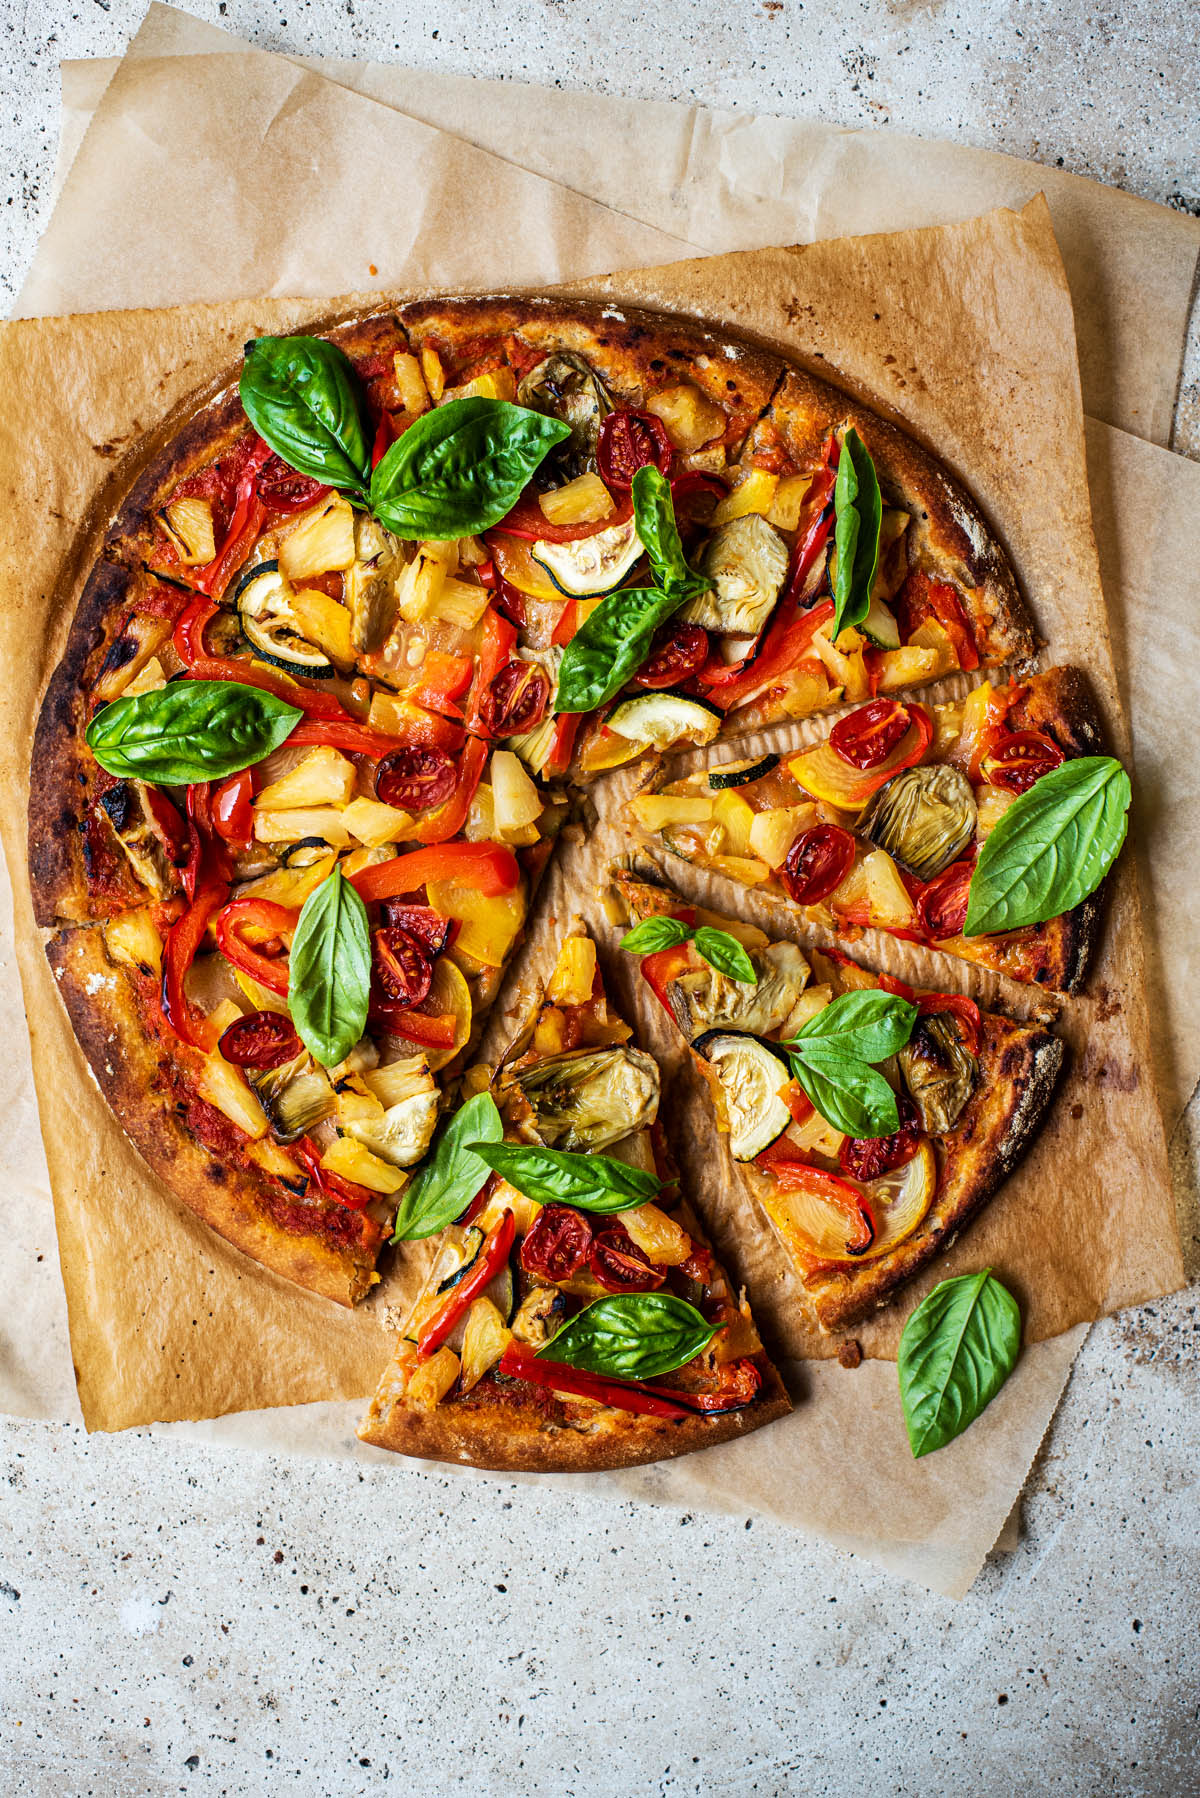 Top down view of pizza topped with vegetables and fresh basil.